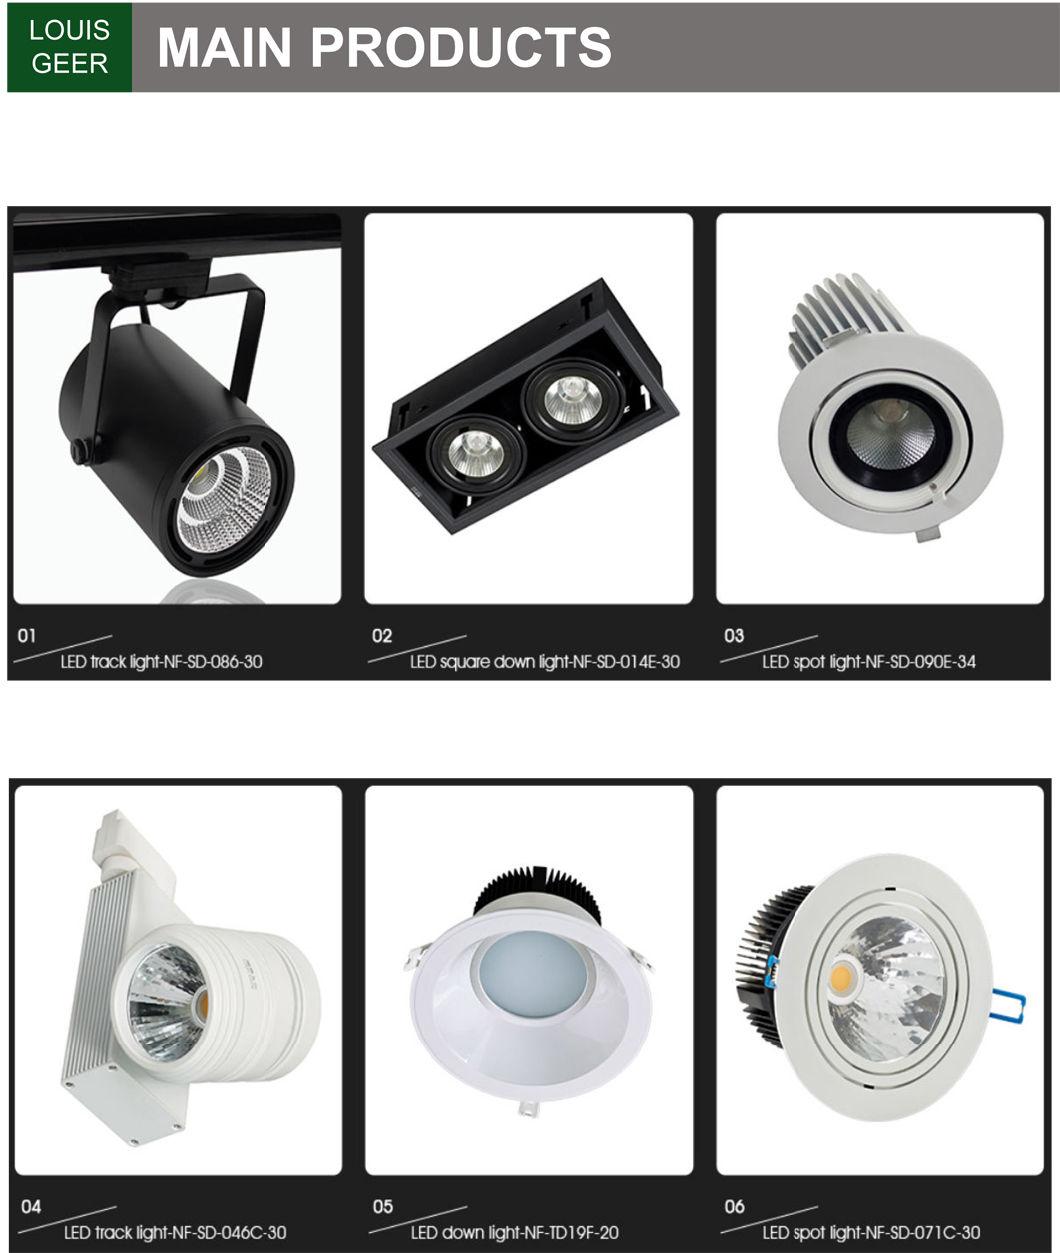 30W Aluminum Round and Square White Fixed Recessed Ceiling Spotlight Mini LED Downlight Energy Saving Lamp